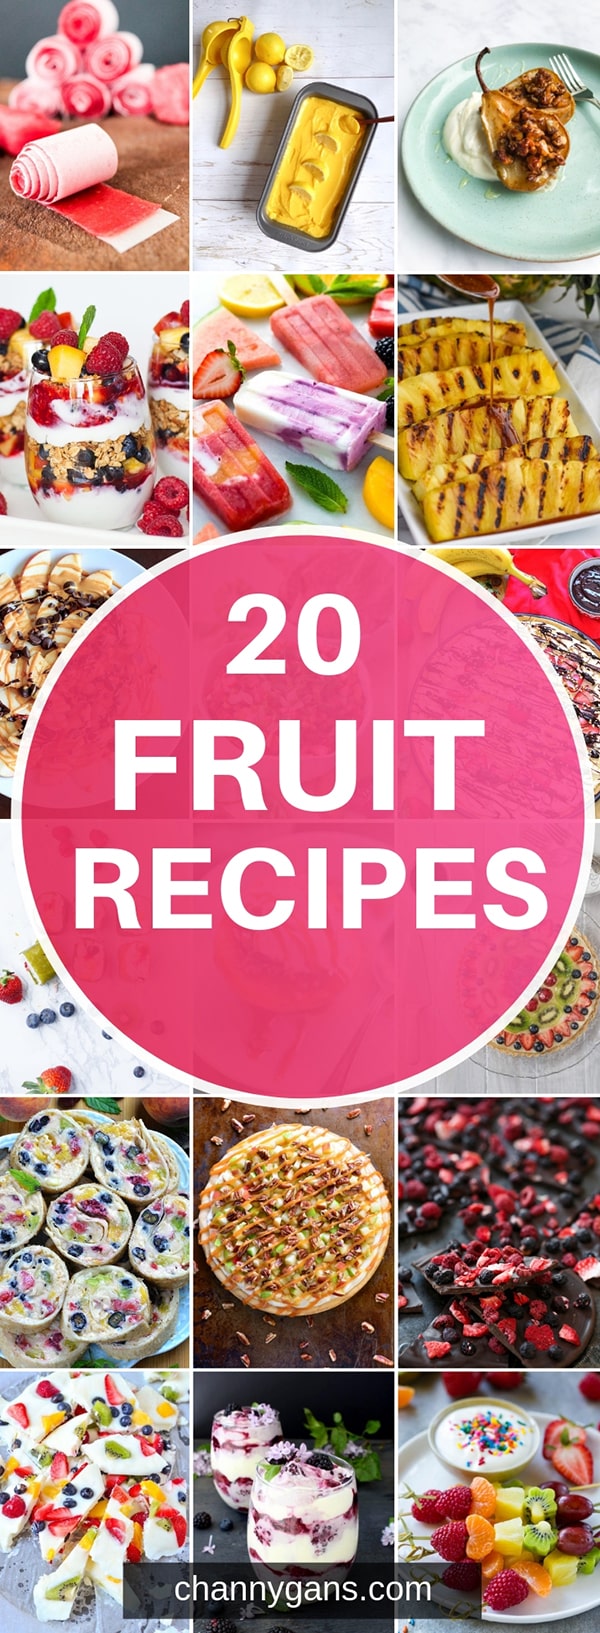 20 Fun Fruit Recipes. Fruit is certainly not only for breakfast or snacks - they make great desserts too! Try some of these fruit recipes to make a delicious and healthier dessert.